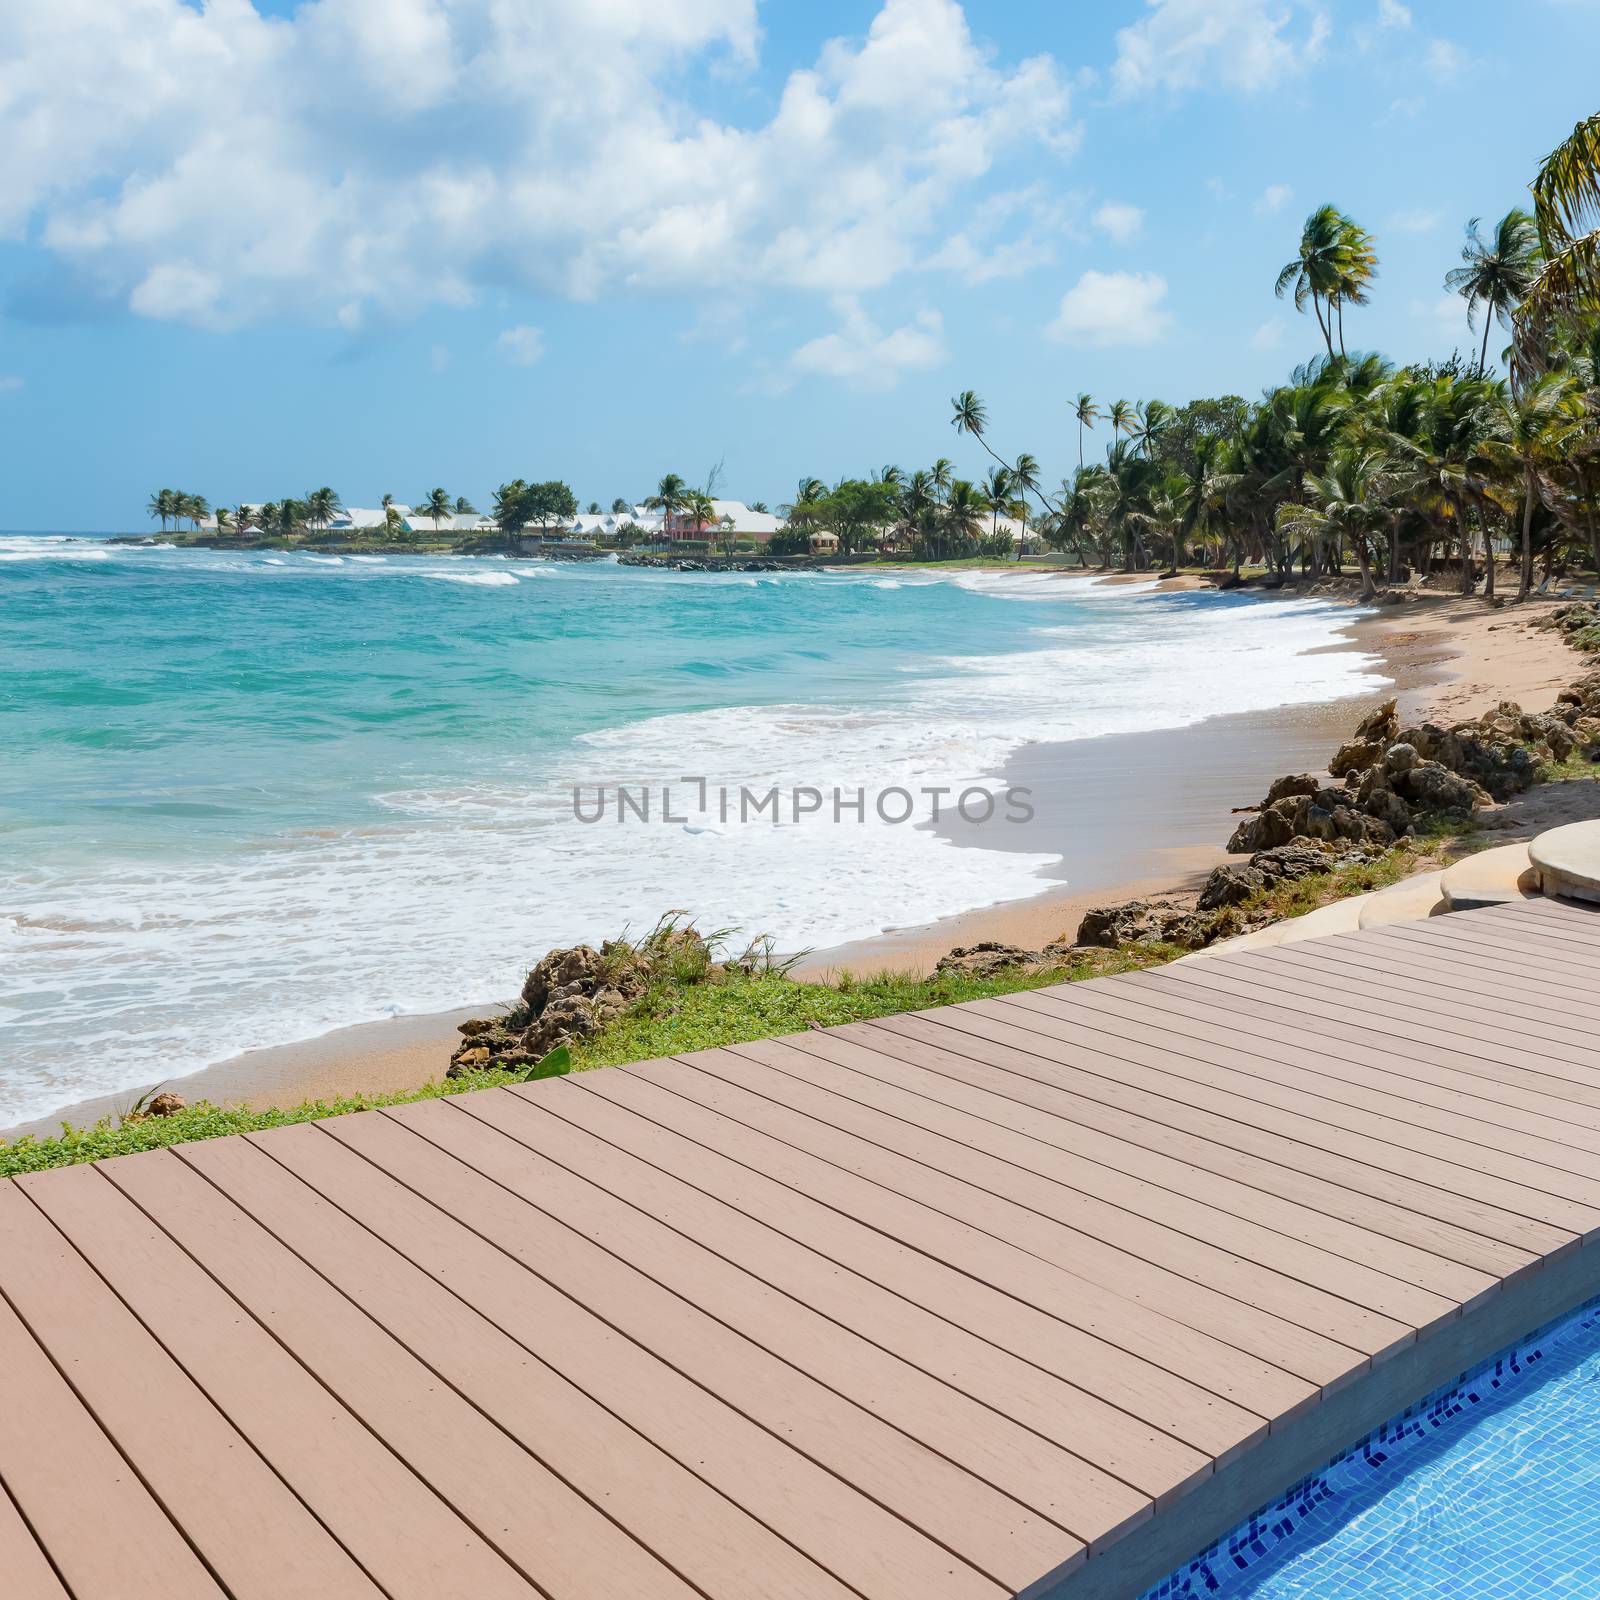 Tropical beach Tobago Caribbean nearby pool and wooden deck square by Altinosmanaj